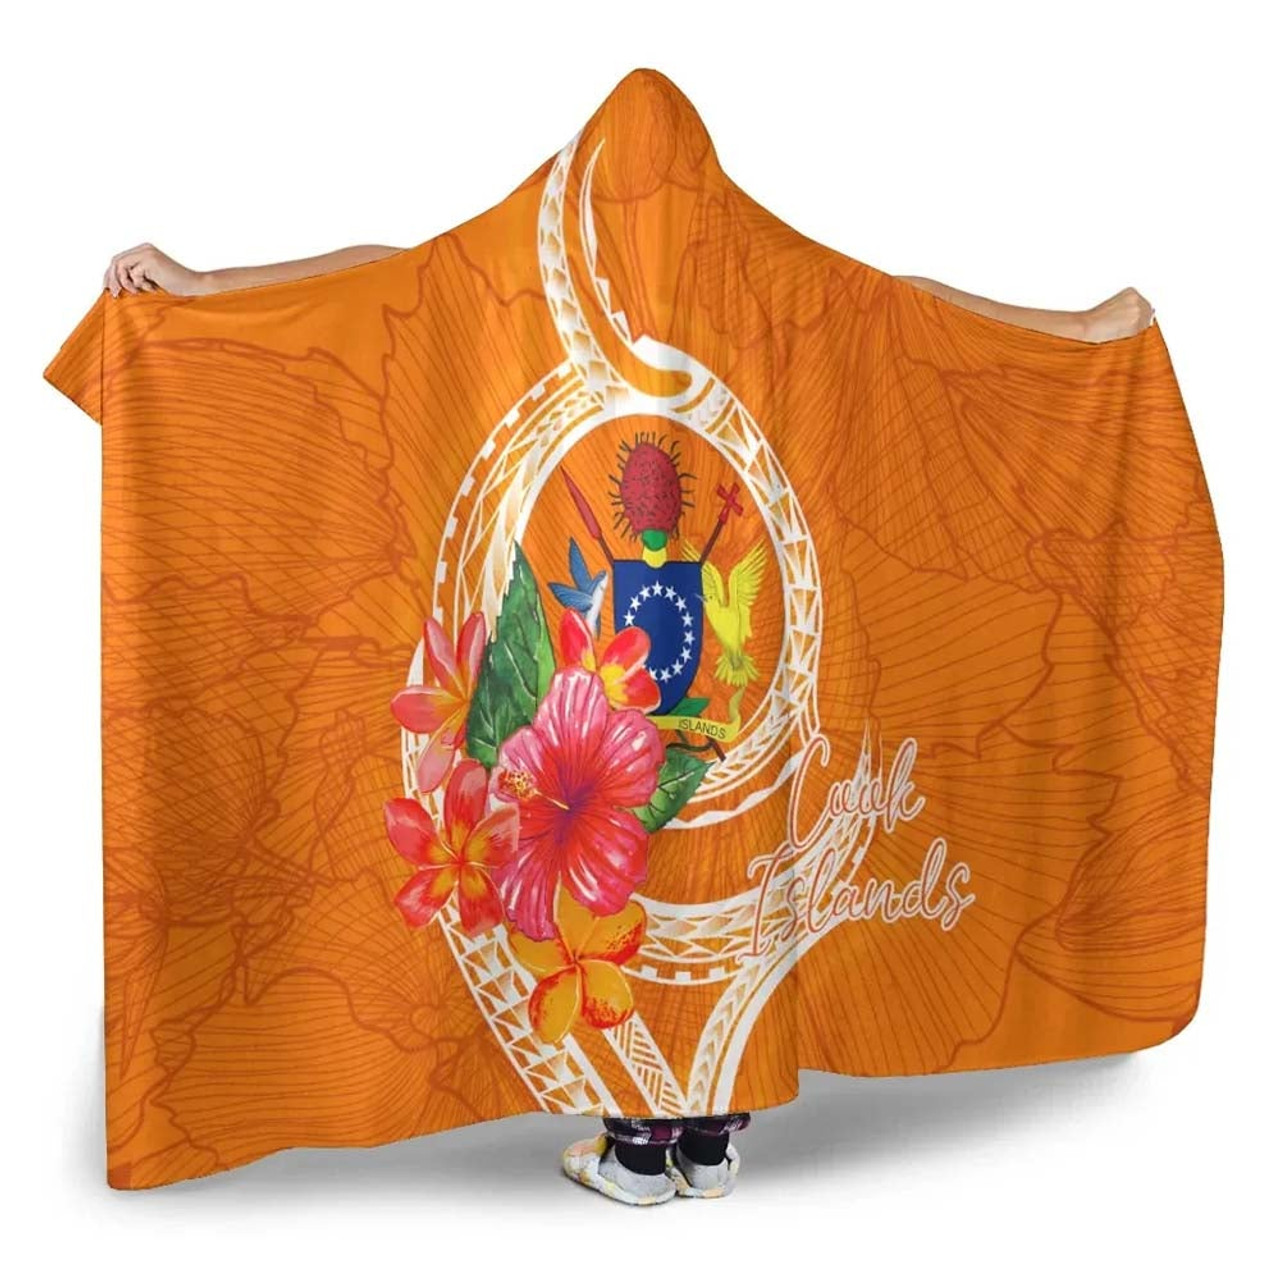 Cook Islands Polynesian Hooded Blanket - Orange Floral With Seal 3